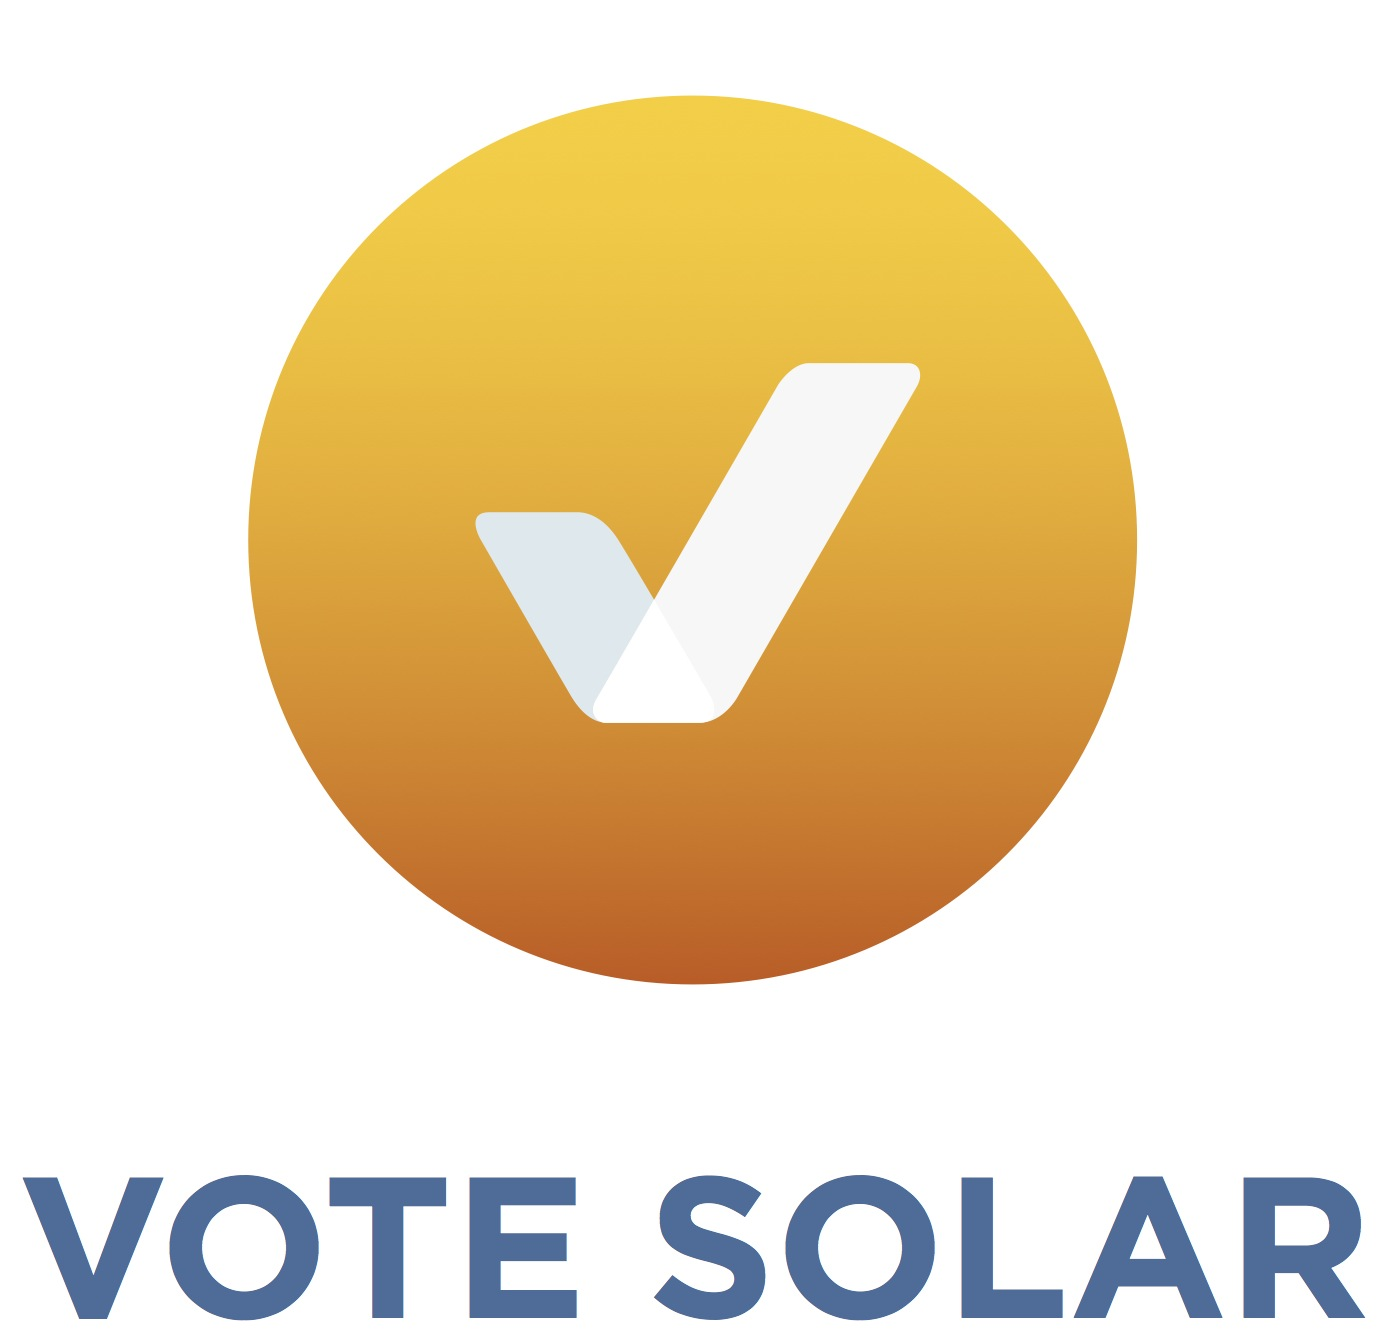 1435: Peter Olmsted; Vote Solar